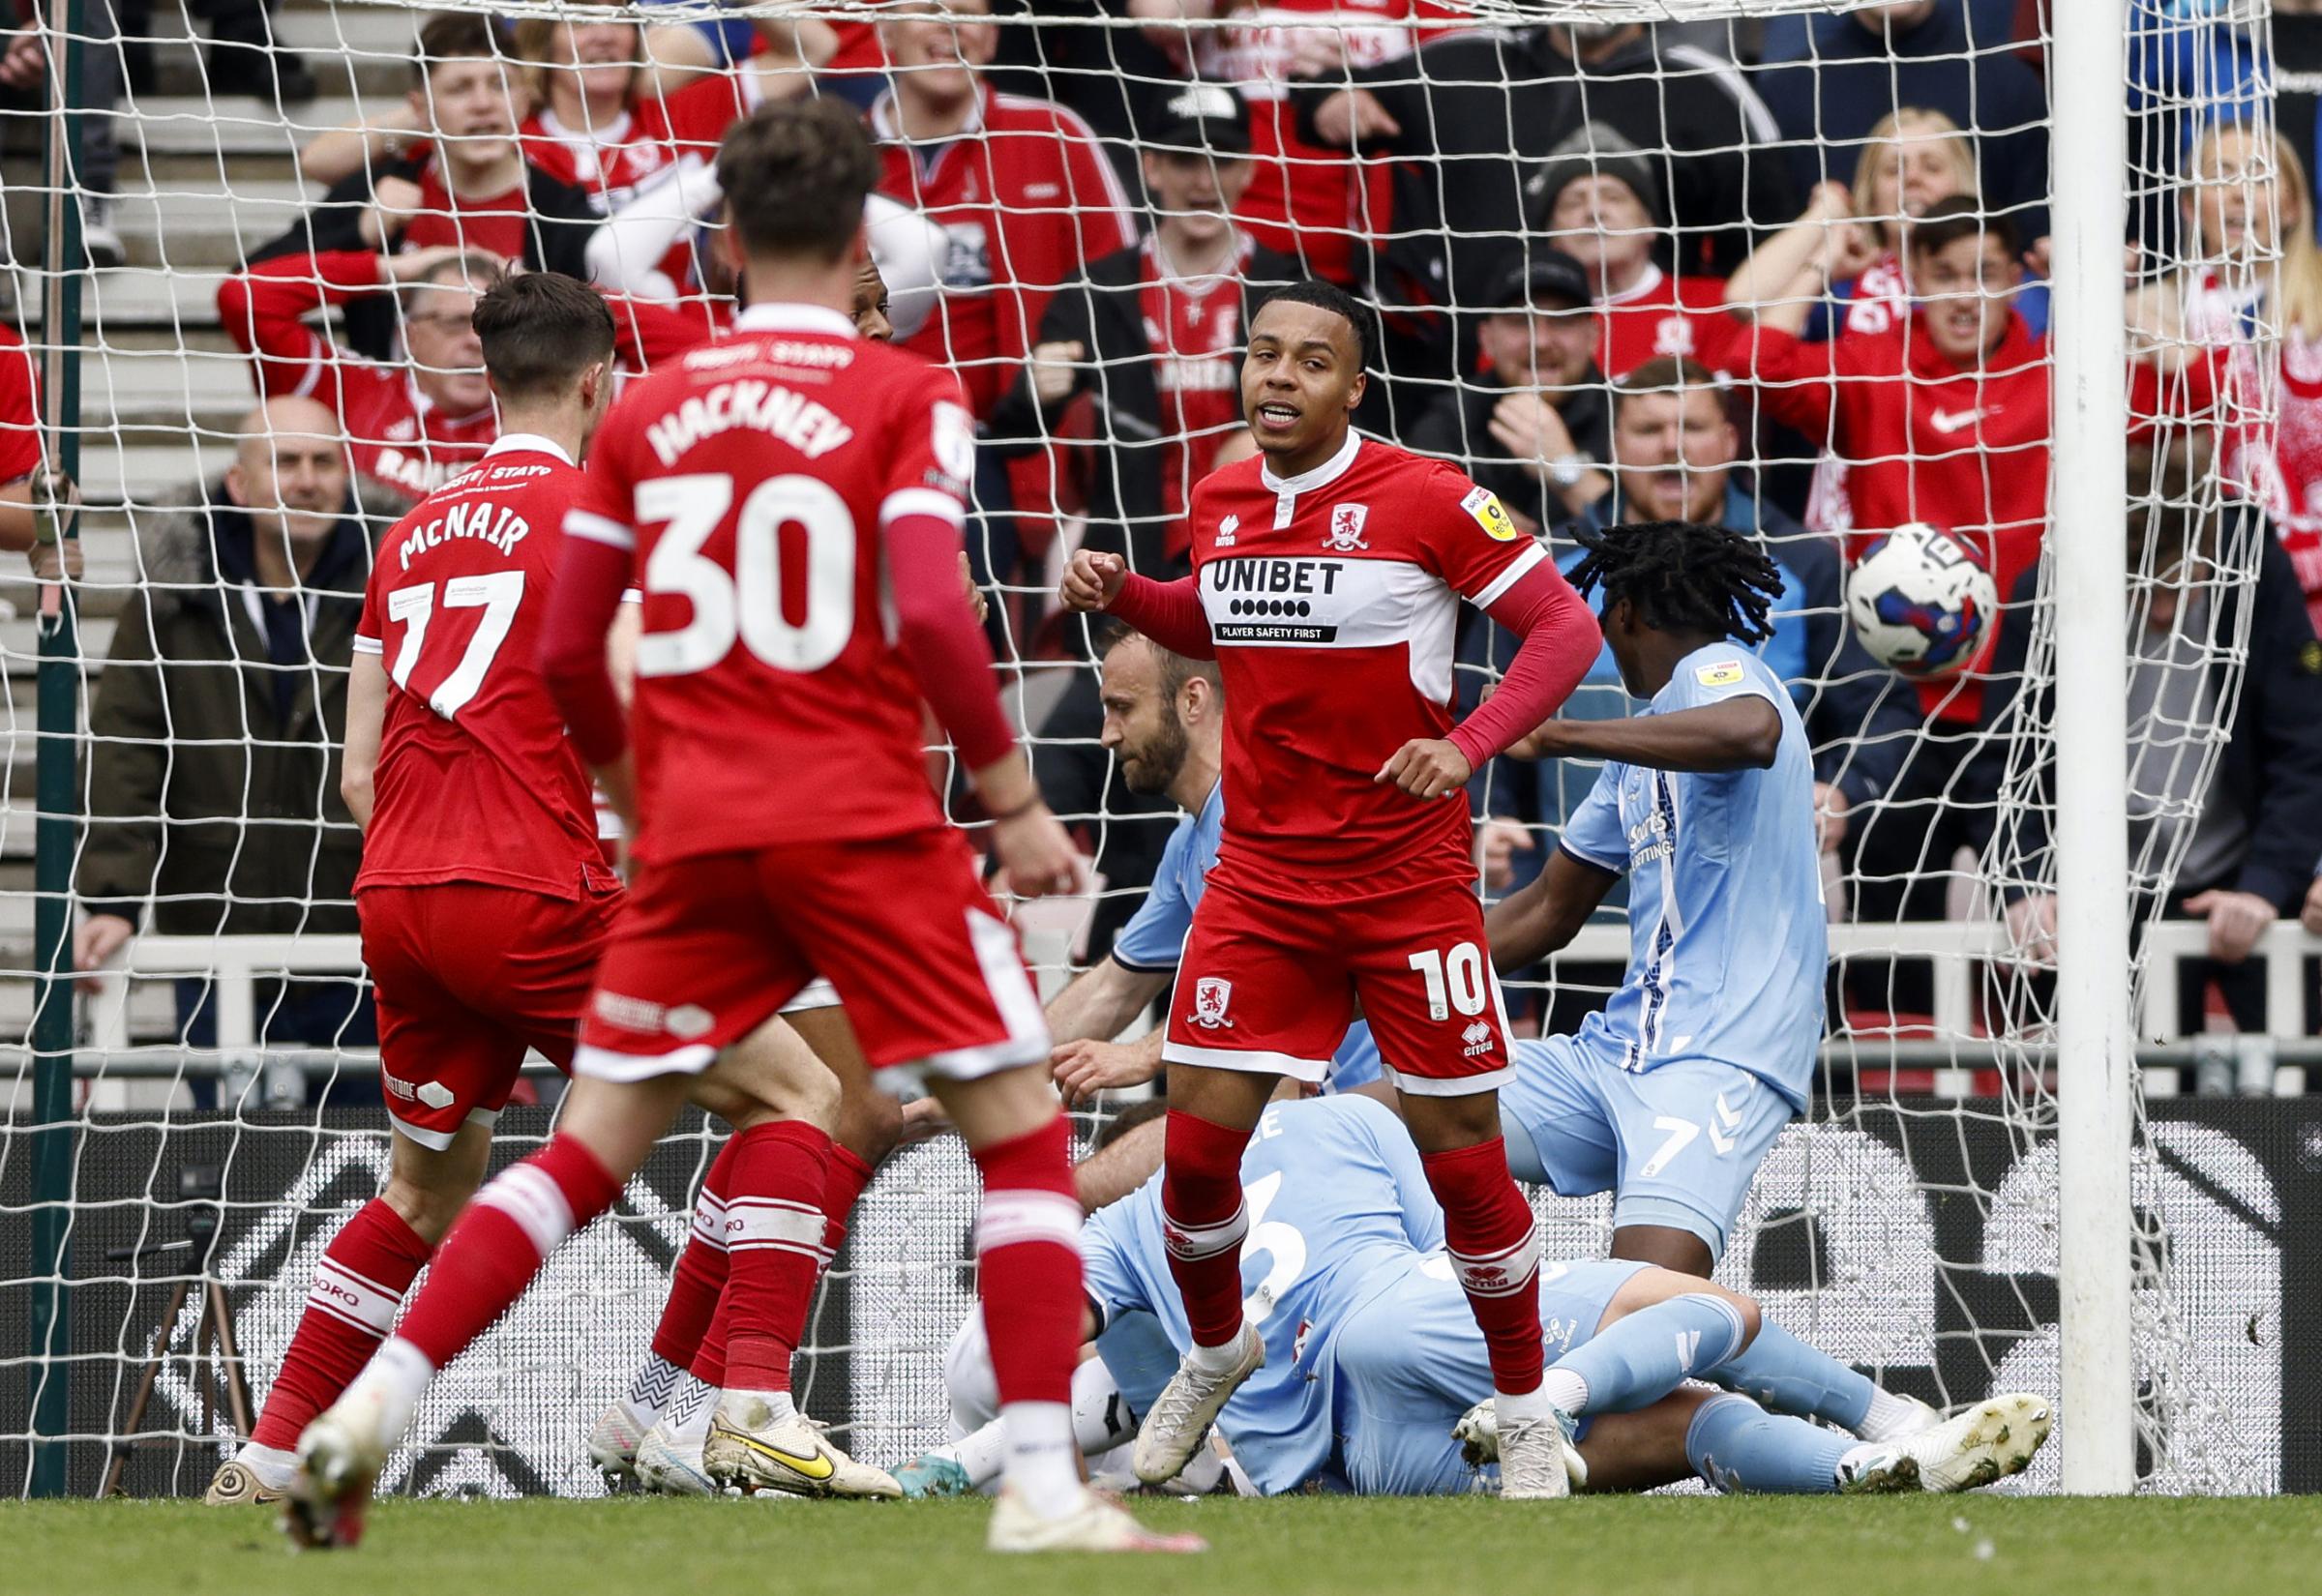 Middlesbrough 1-1 Coventry: Draw sets up repeat in play-offs